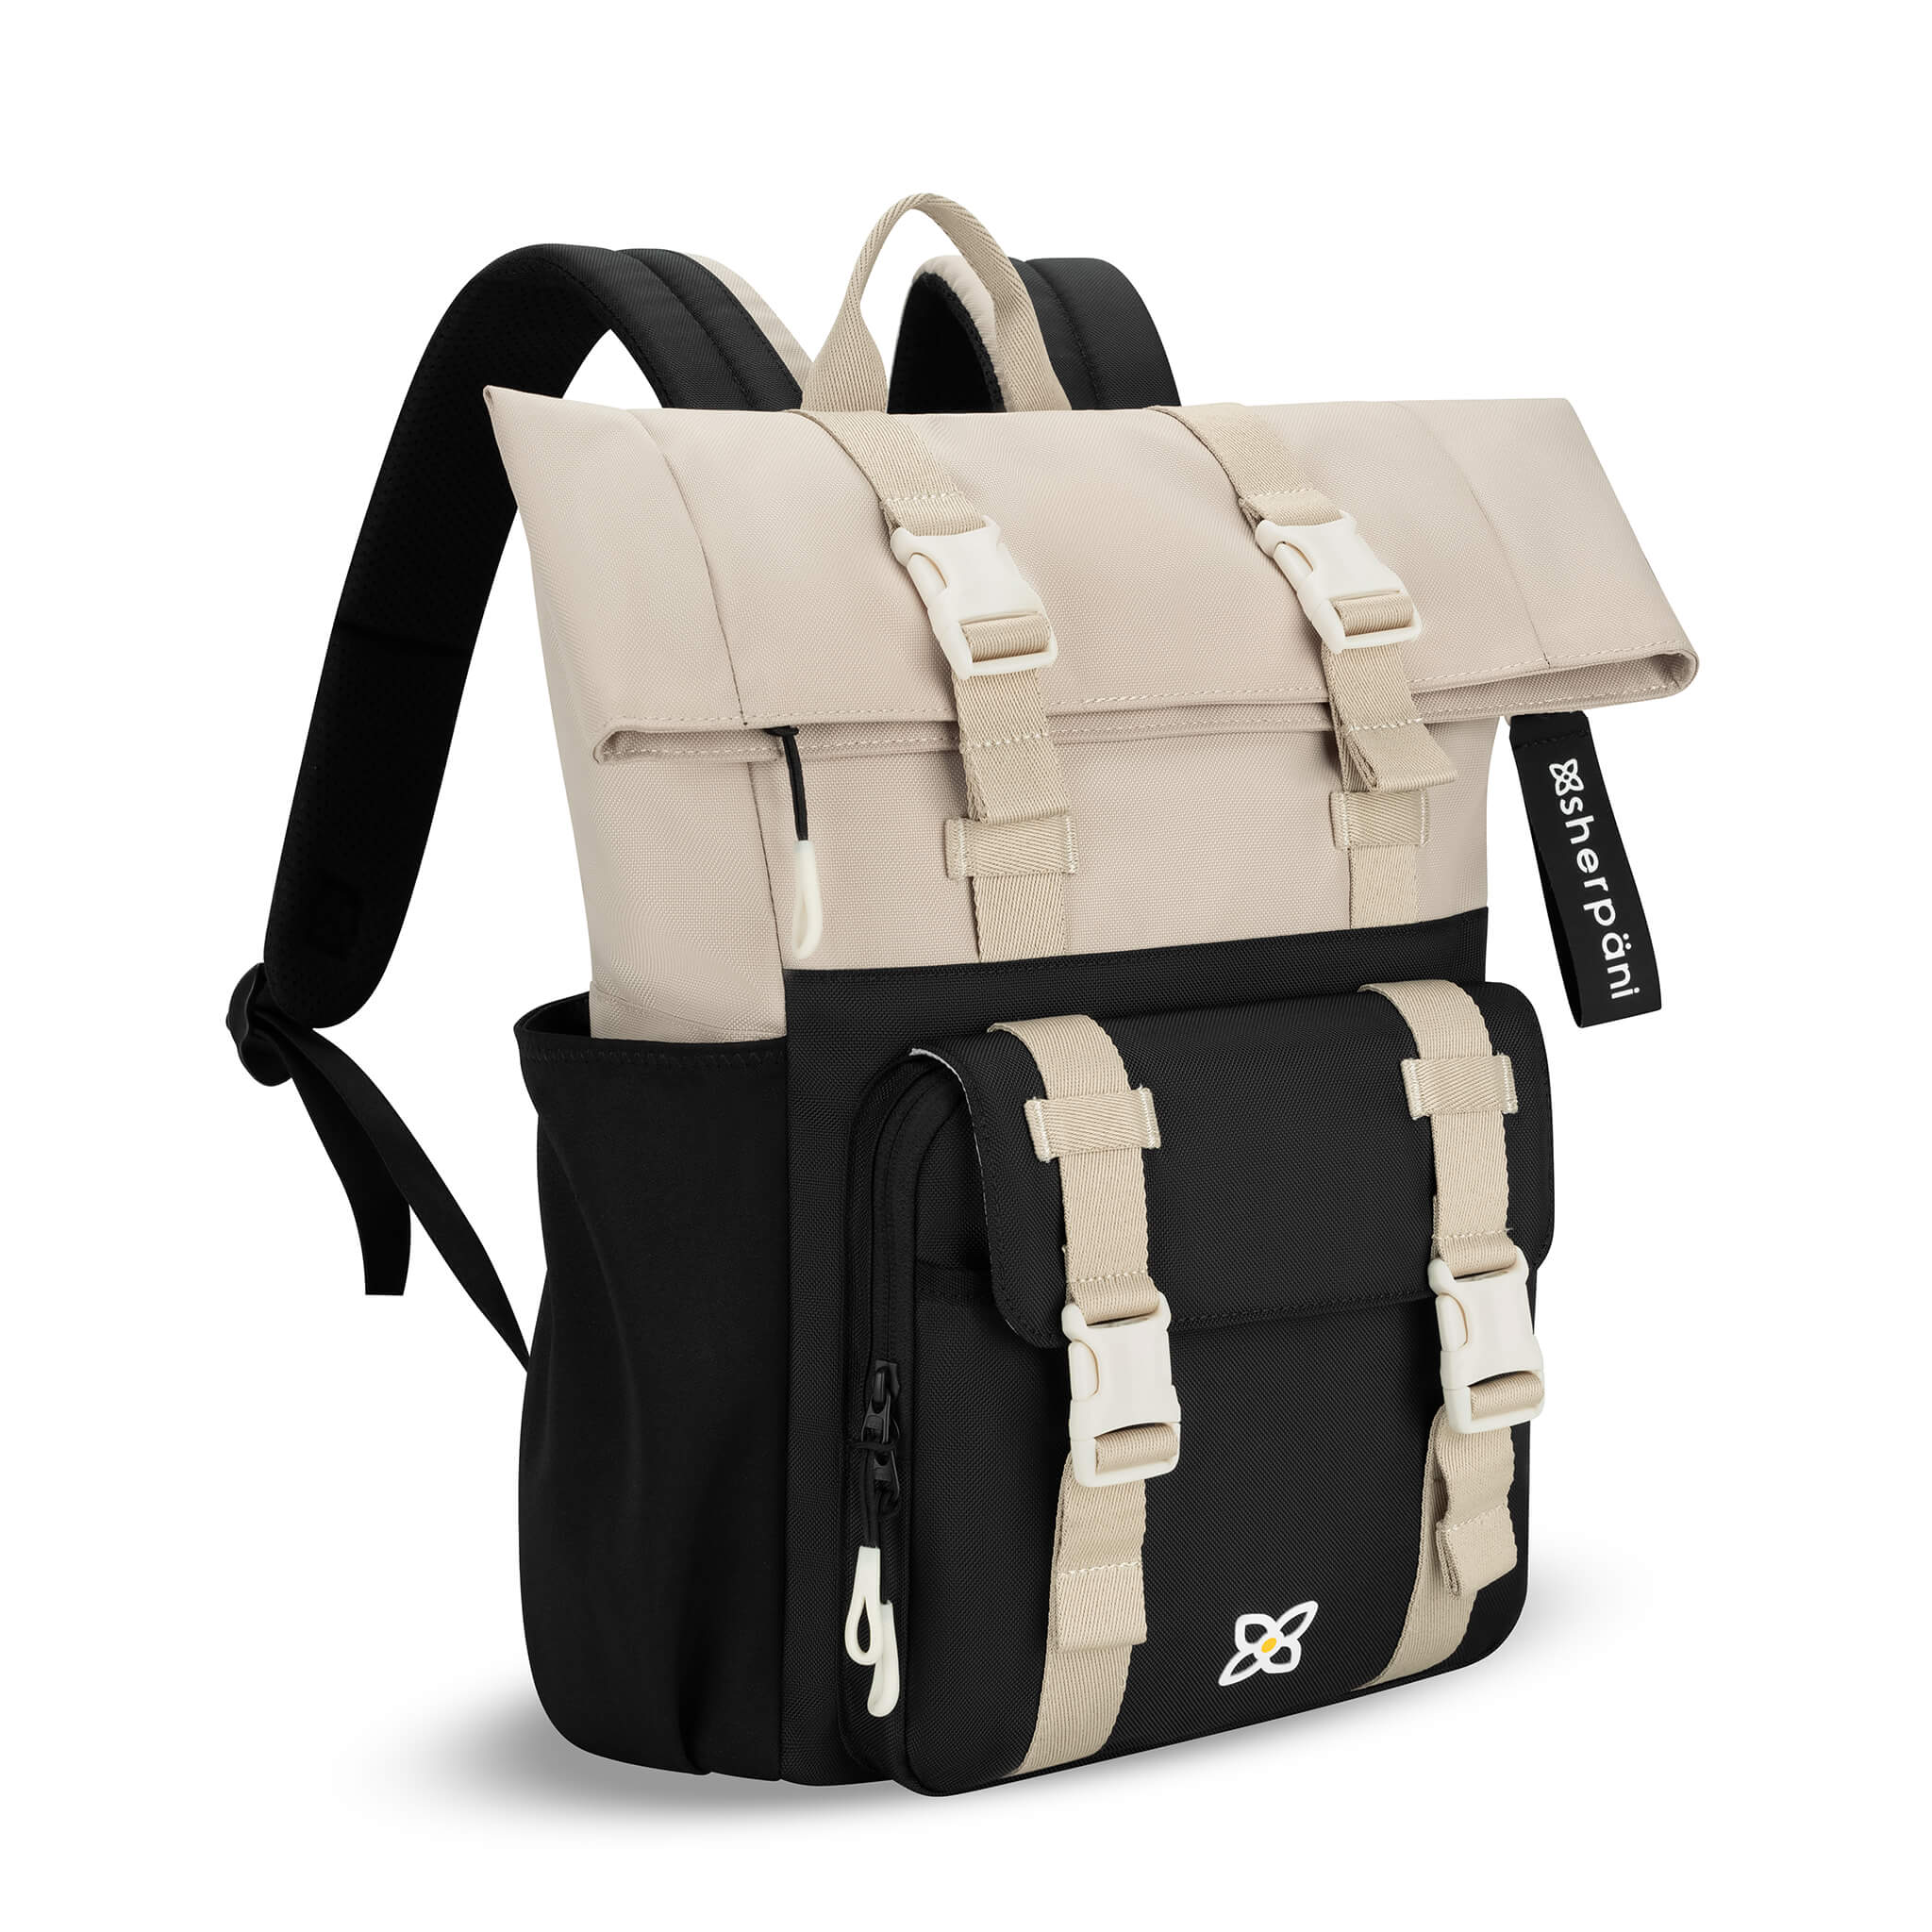 Angled front view of the Sedona in Con Leche. The compact backpack features ergonomic straps and a stylish buckle closure. 